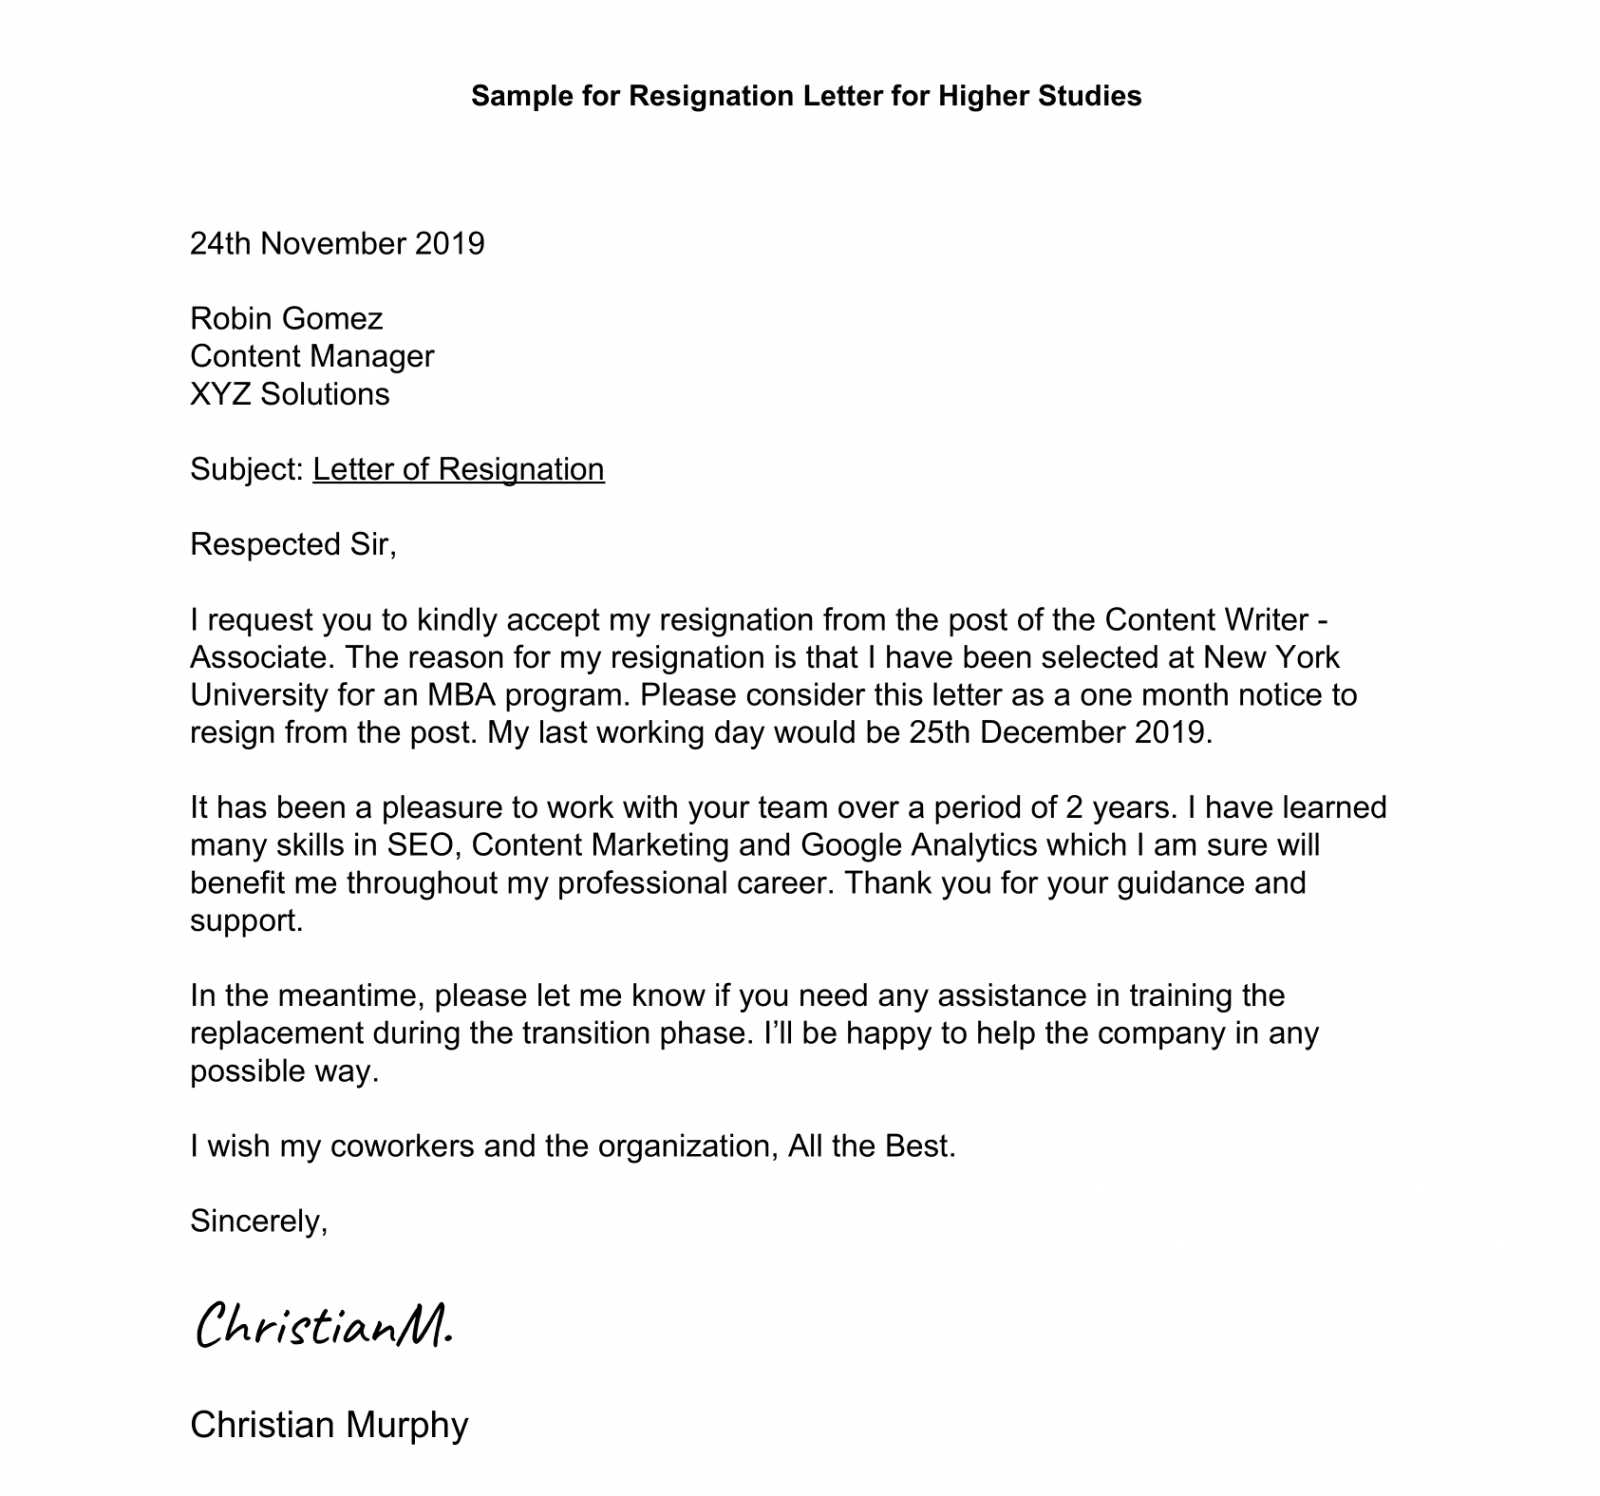 job resignation letter due to higher education